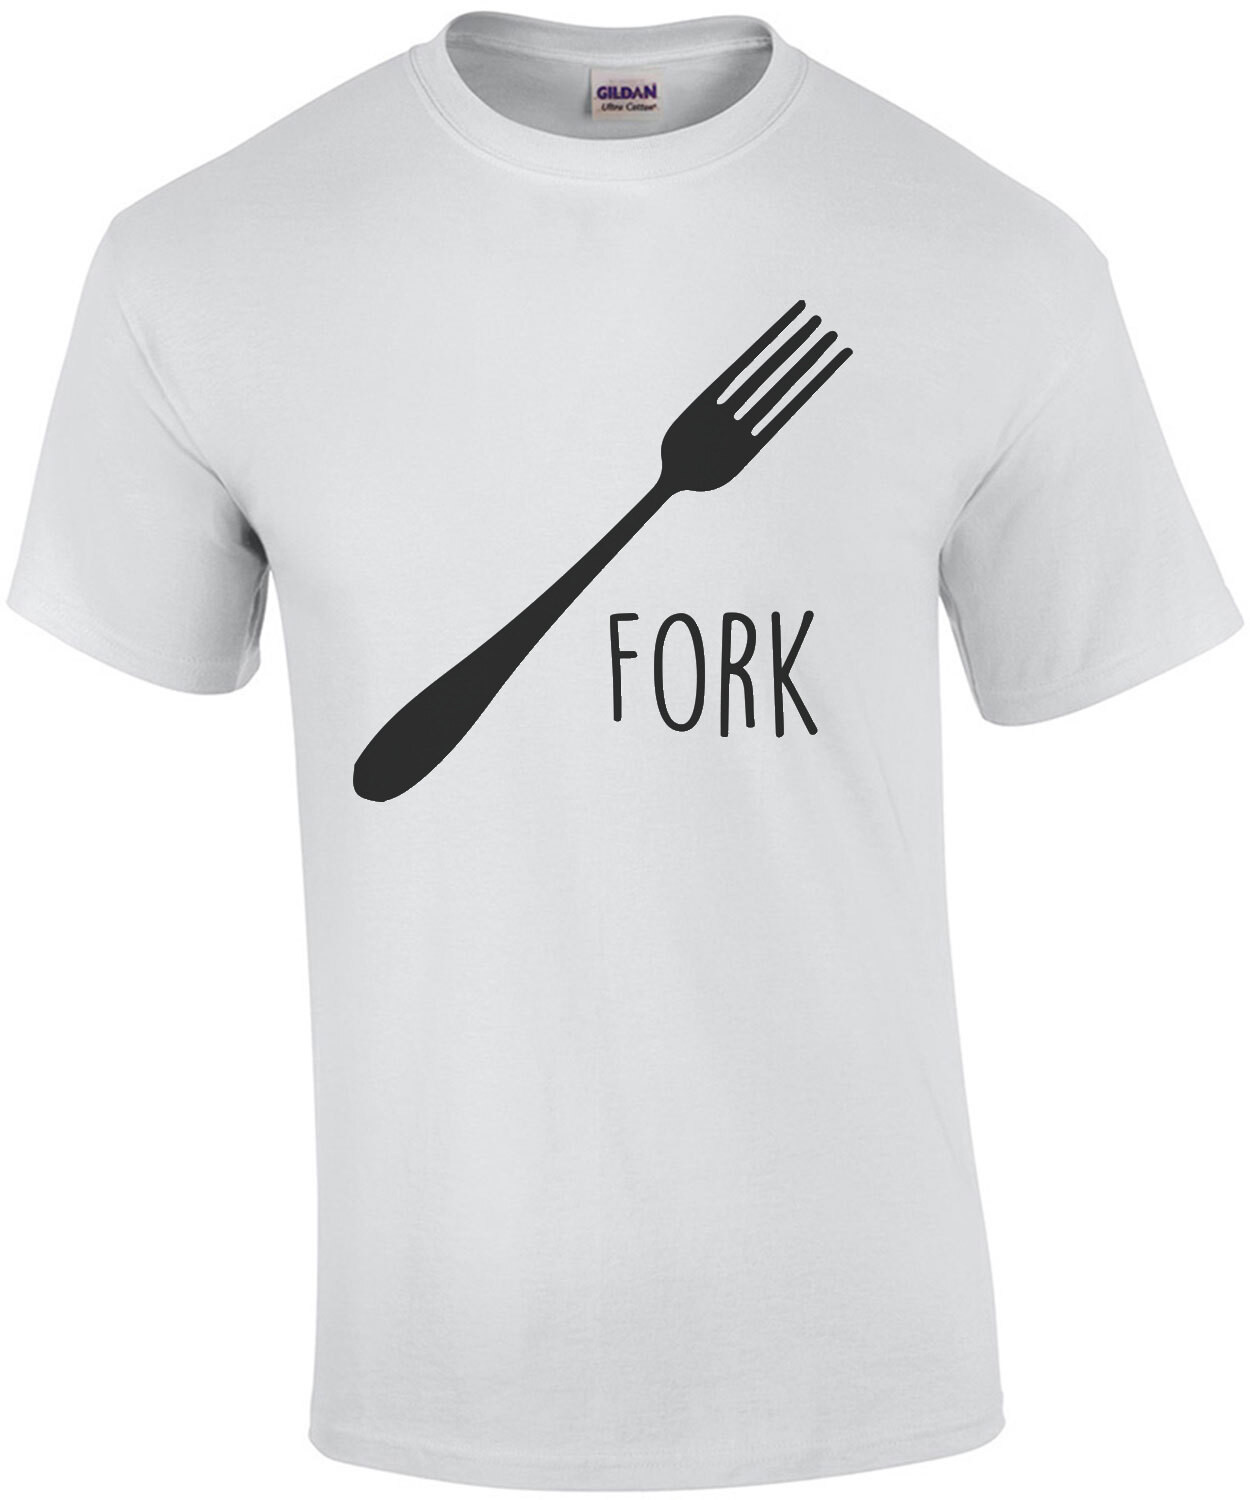 Fork - Part 1 of 3 - Funny Family Group T-Shirt